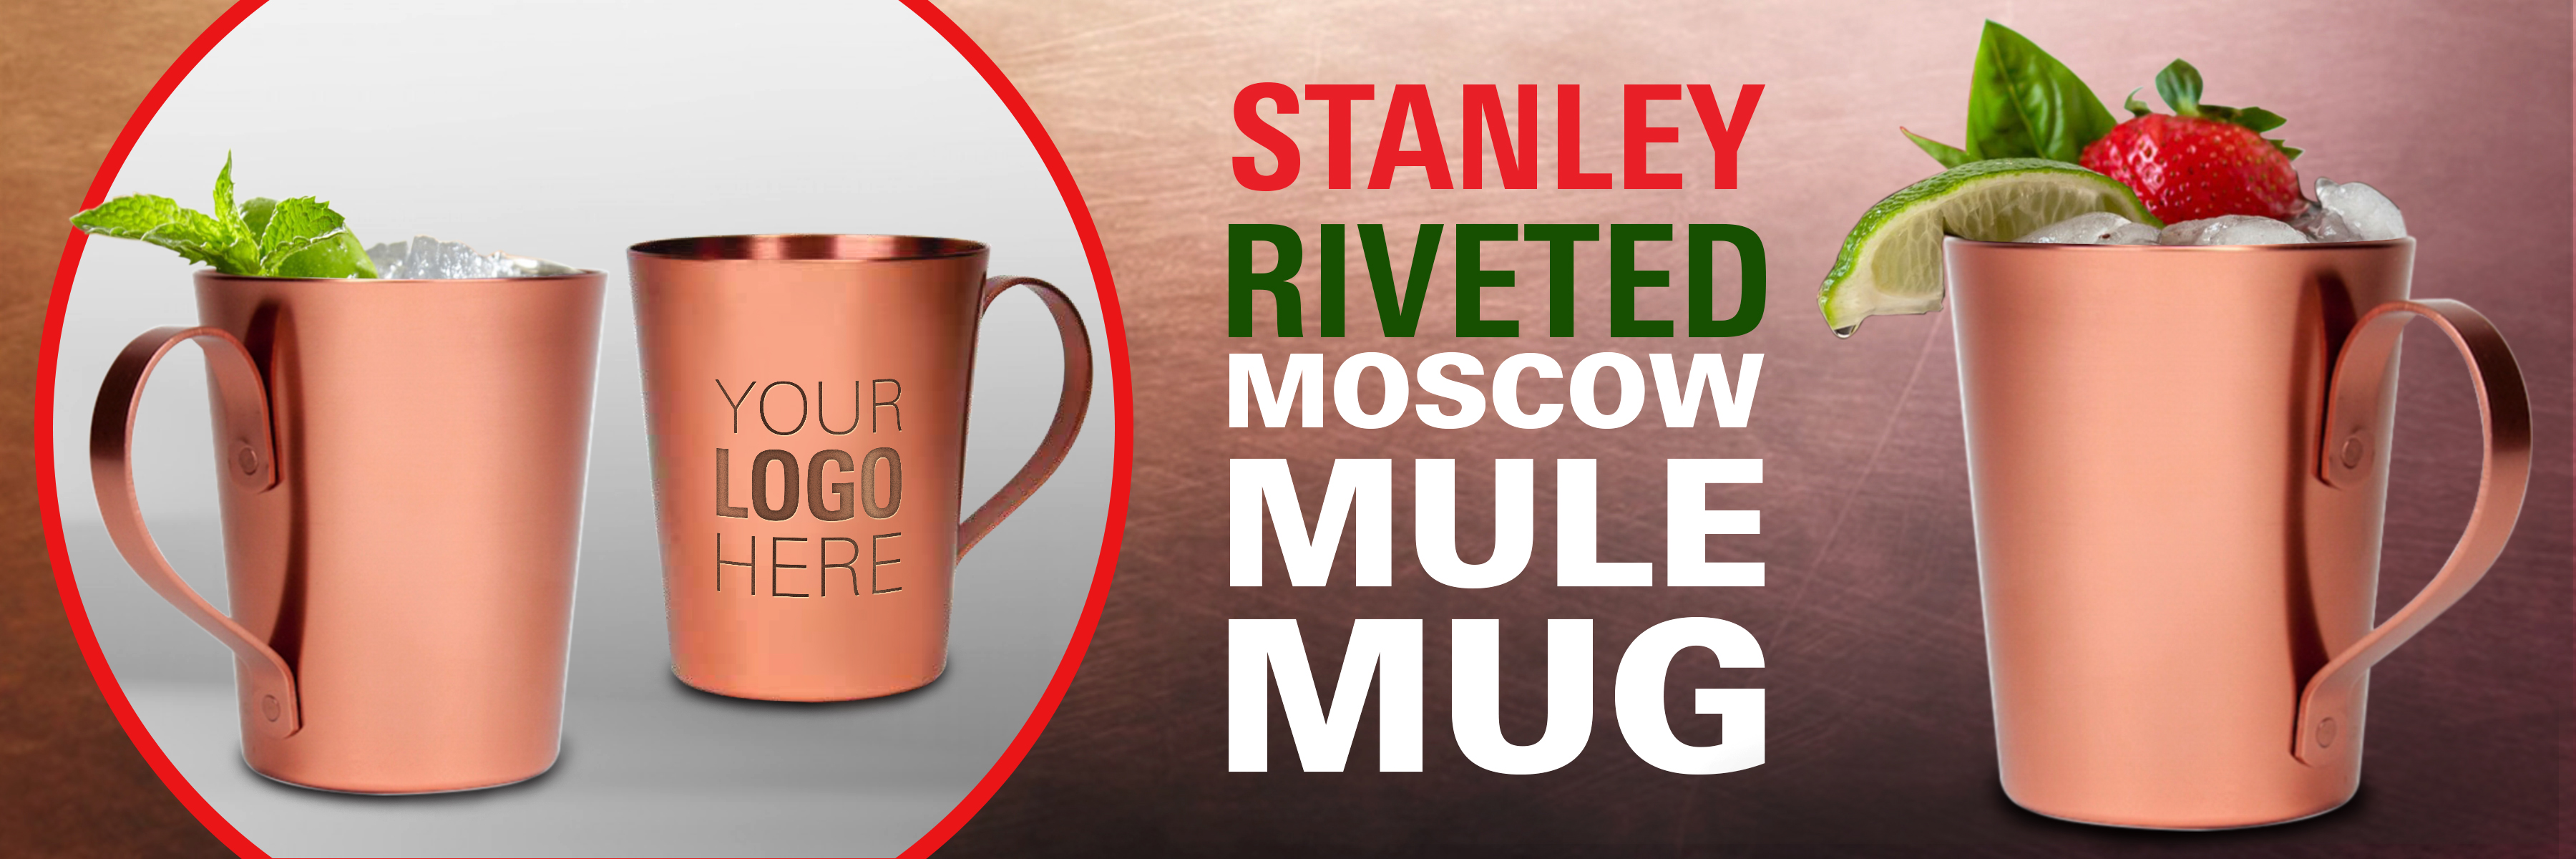 Stanley Riveted Moscow Mule